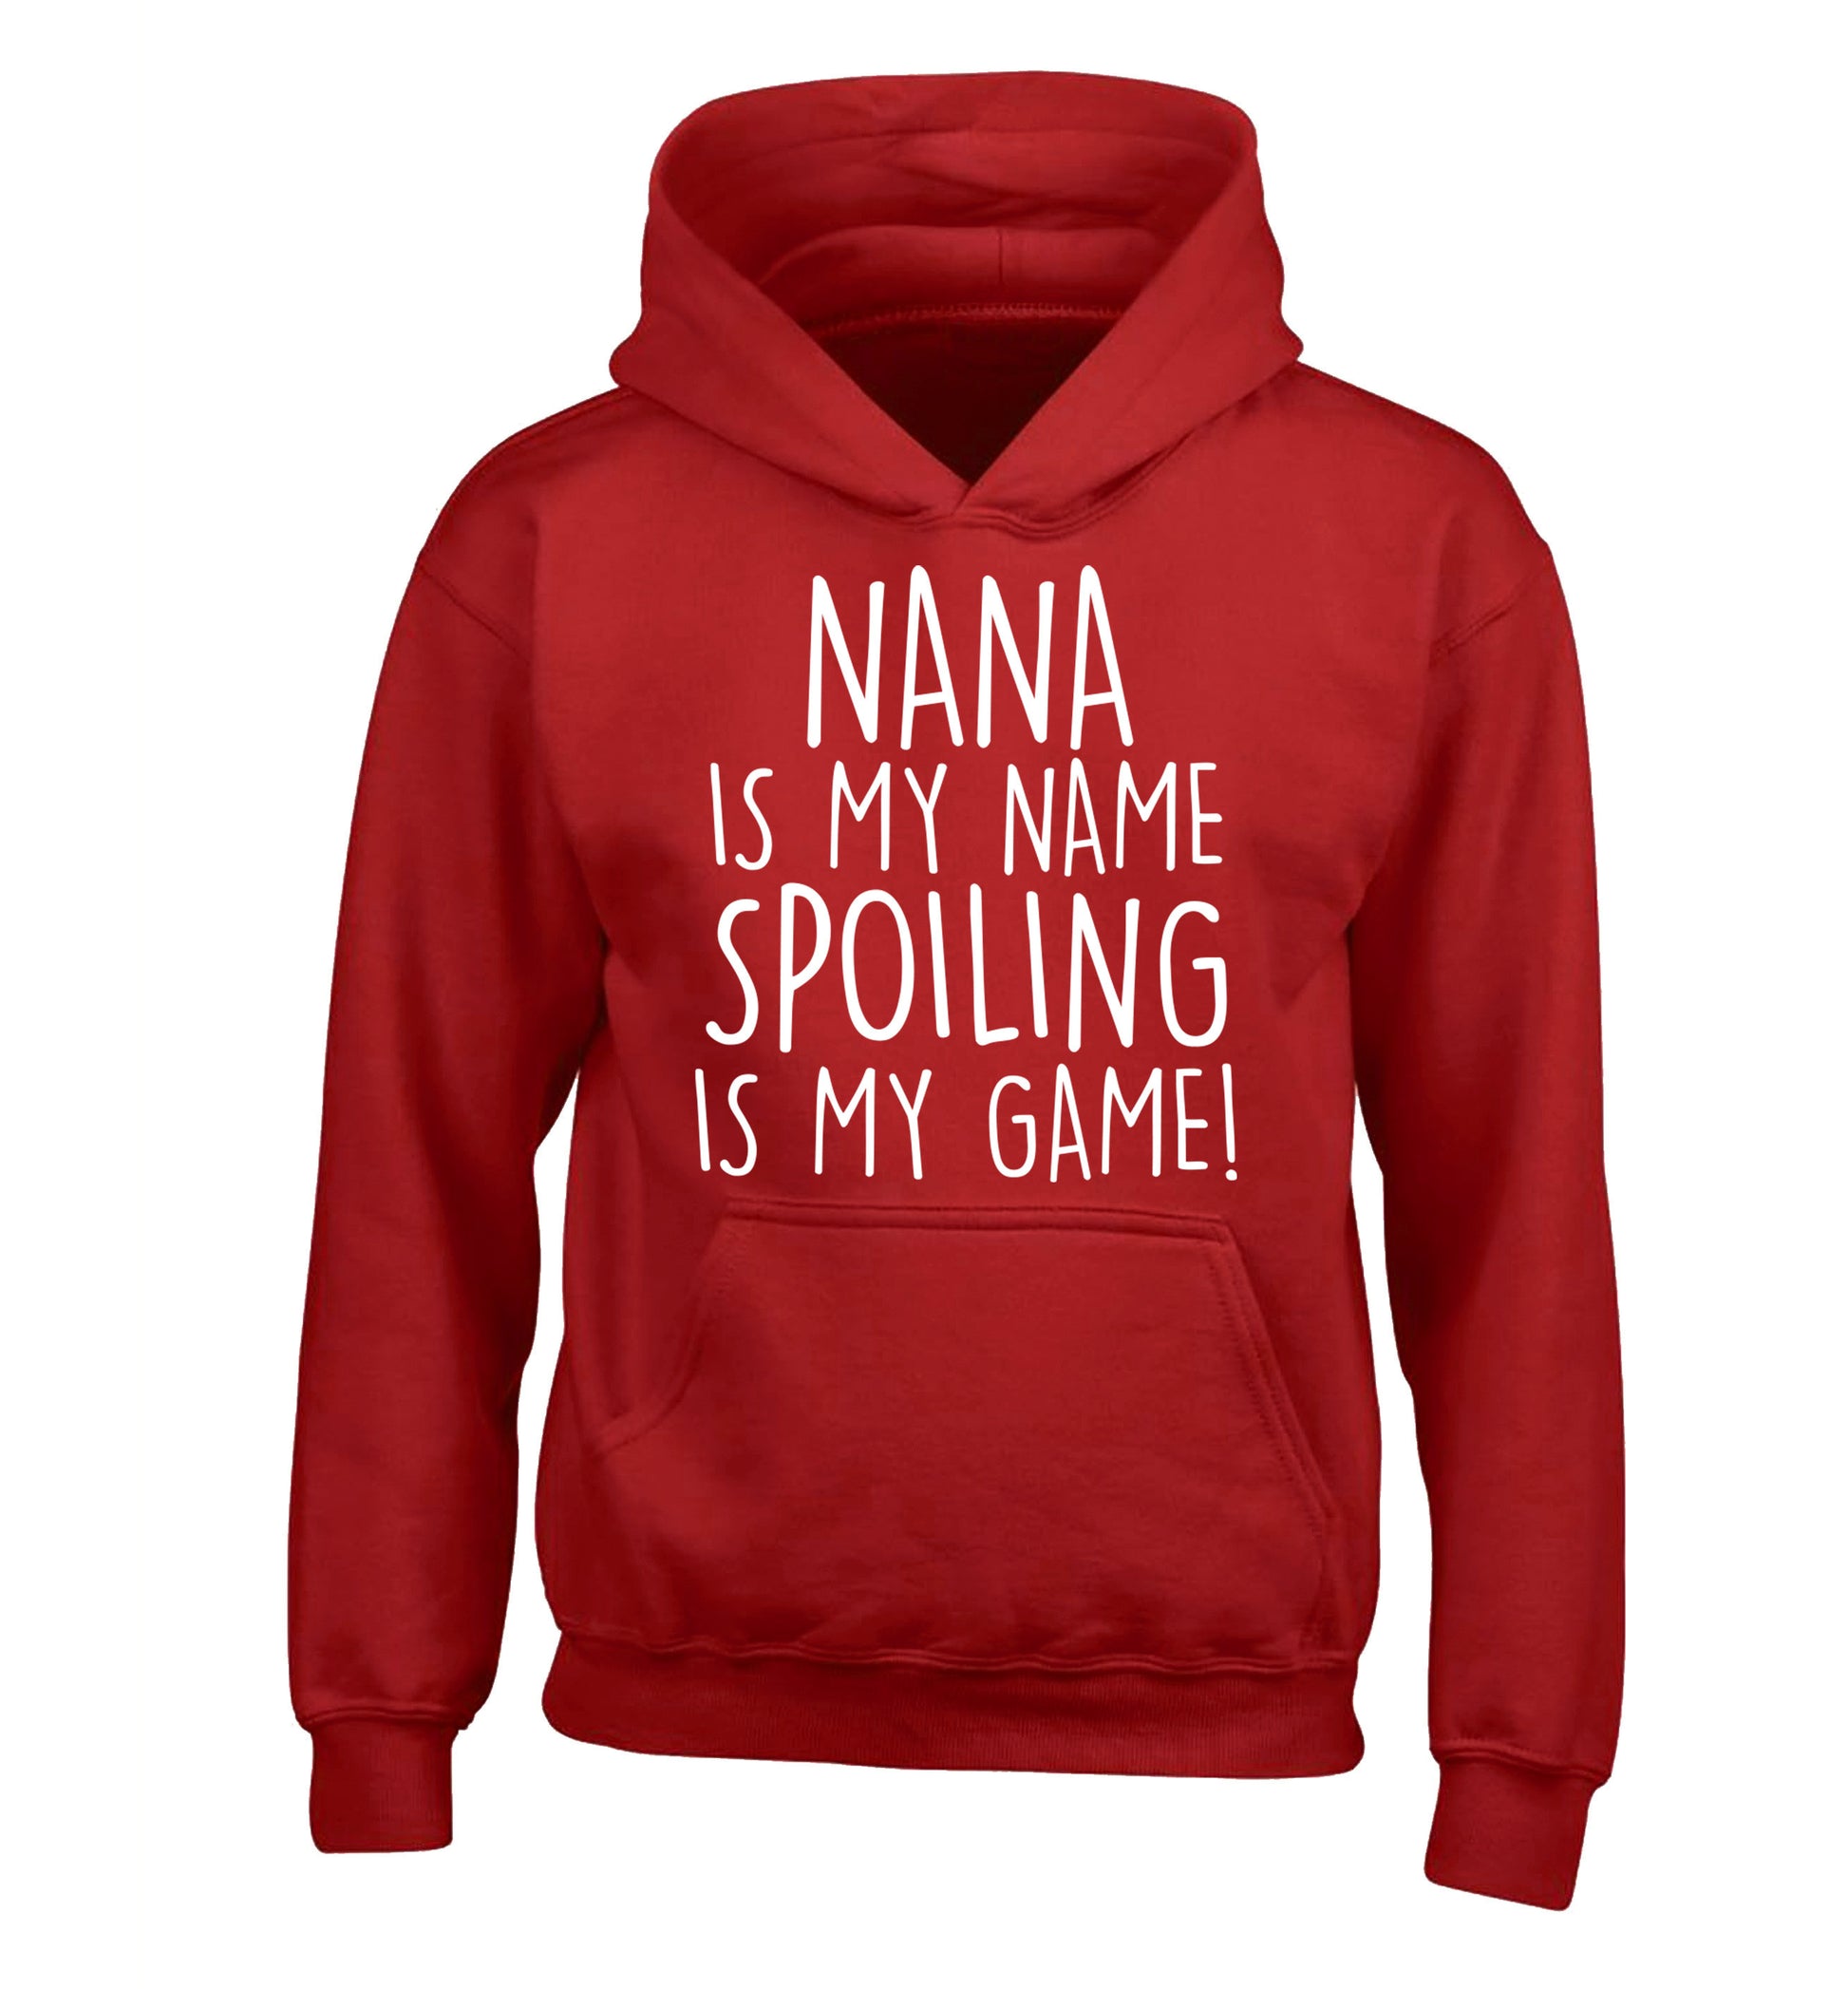 Nana is my name, spoiling is my game children's red hoodie 12-14 Years